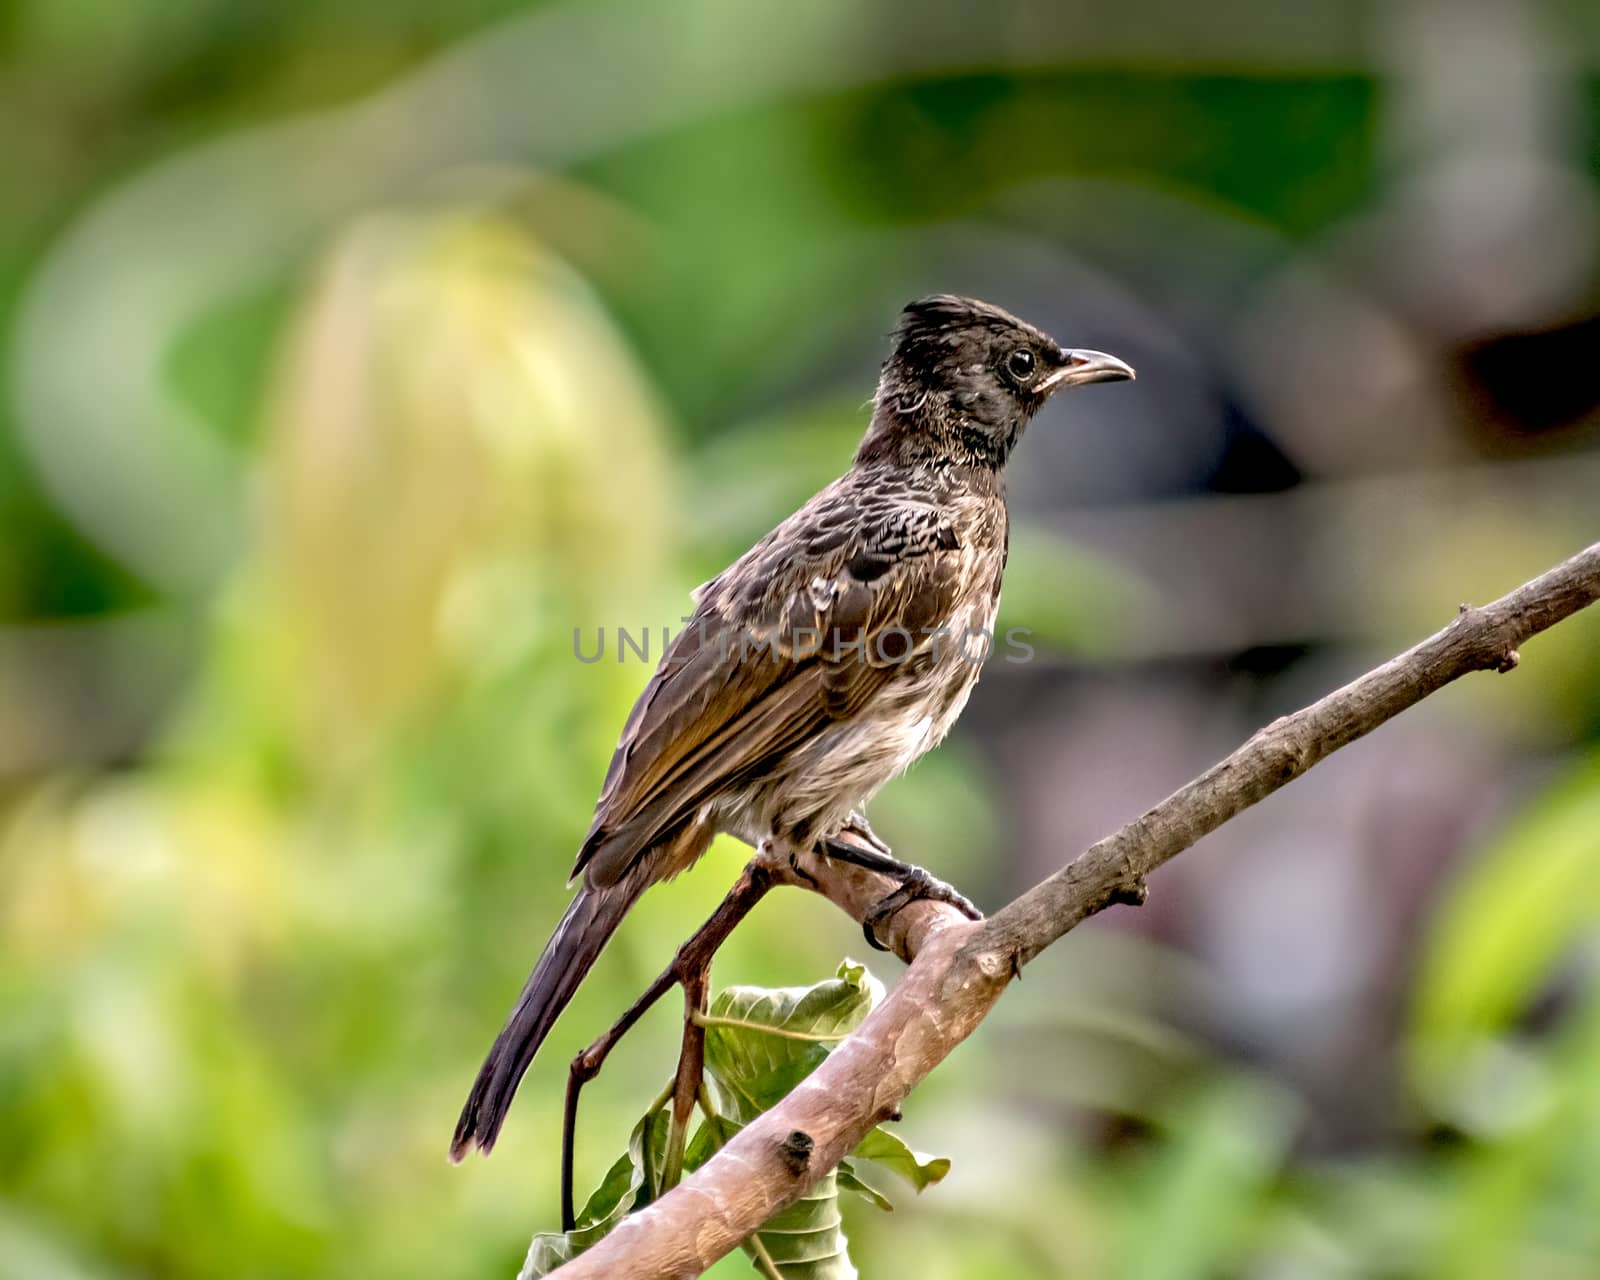 Selective focus, shallow depth of field, isolated, close up image of red vented bulbul sitting on dry tree branch with clear green background.